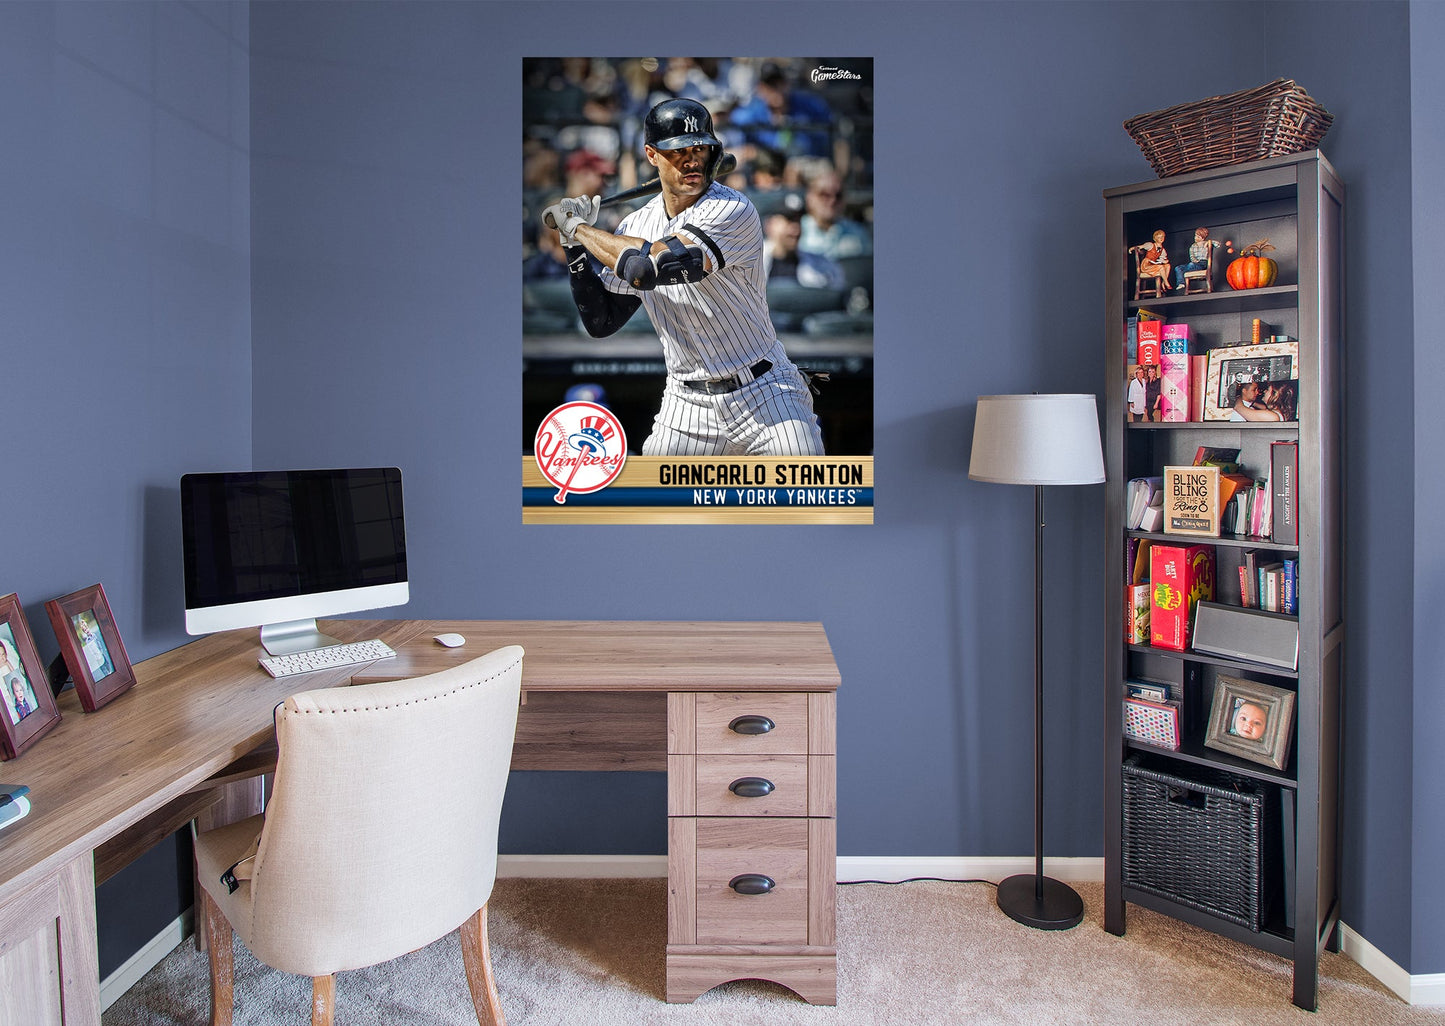 New York Yankees: Giancarlo Stanton  GameStar        - Officially Licensed MLB Removable Wall   Adhesive Decal